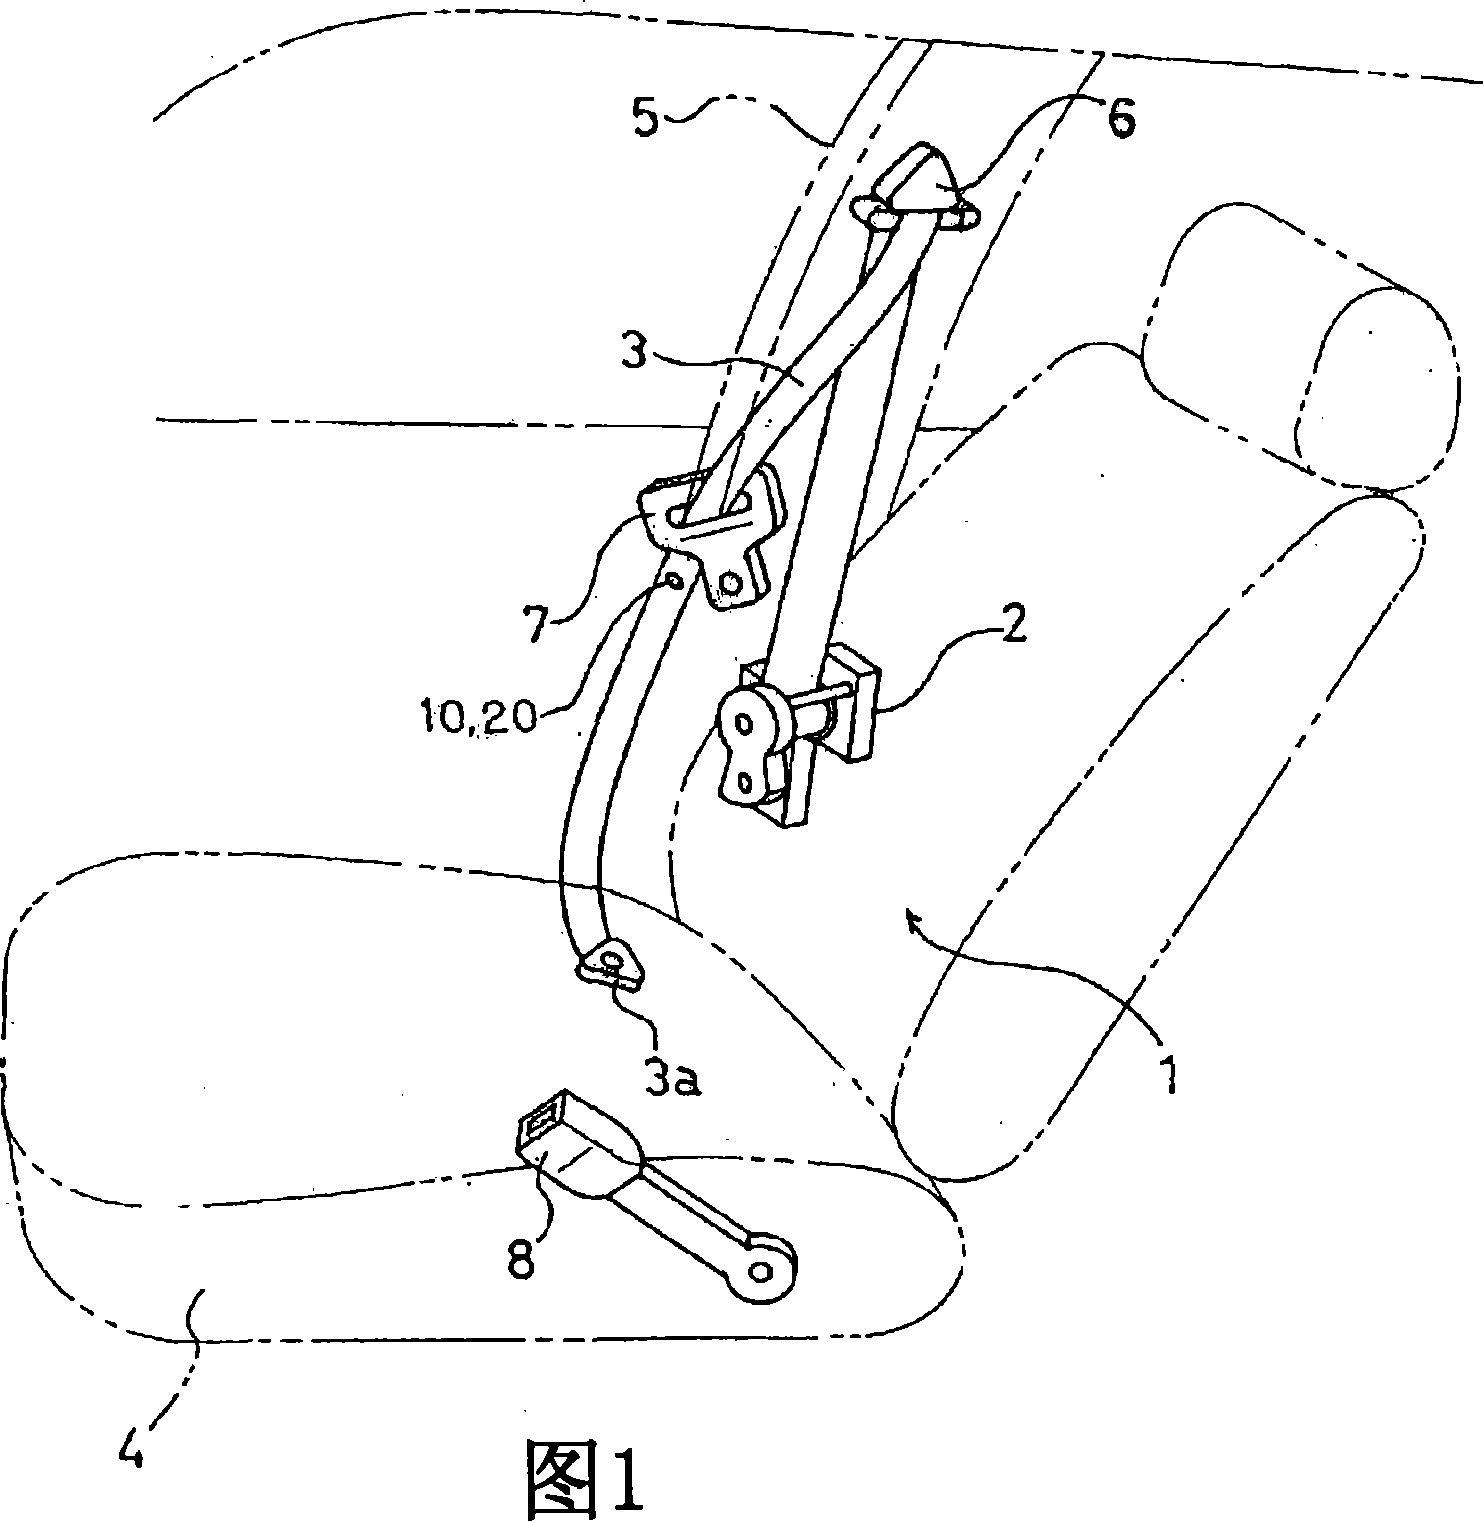 Tongue plate stopper and safety belt device using the same